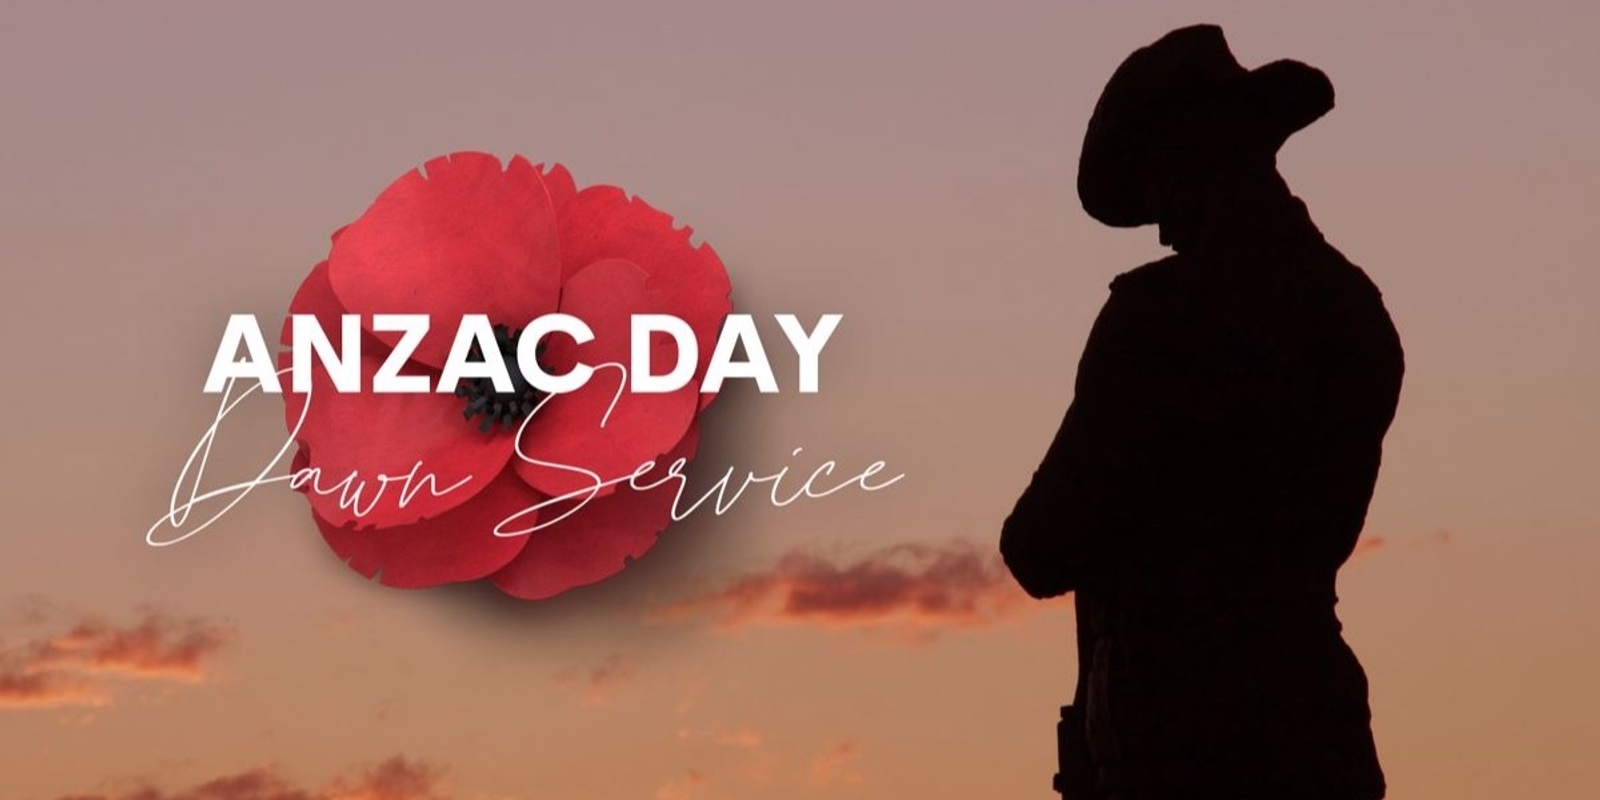 Banner image for ANZAC DAY DAWN SERVICE - BUS SERVICE TO CENTENARY OF ANZAC RESERVE AND RETURN